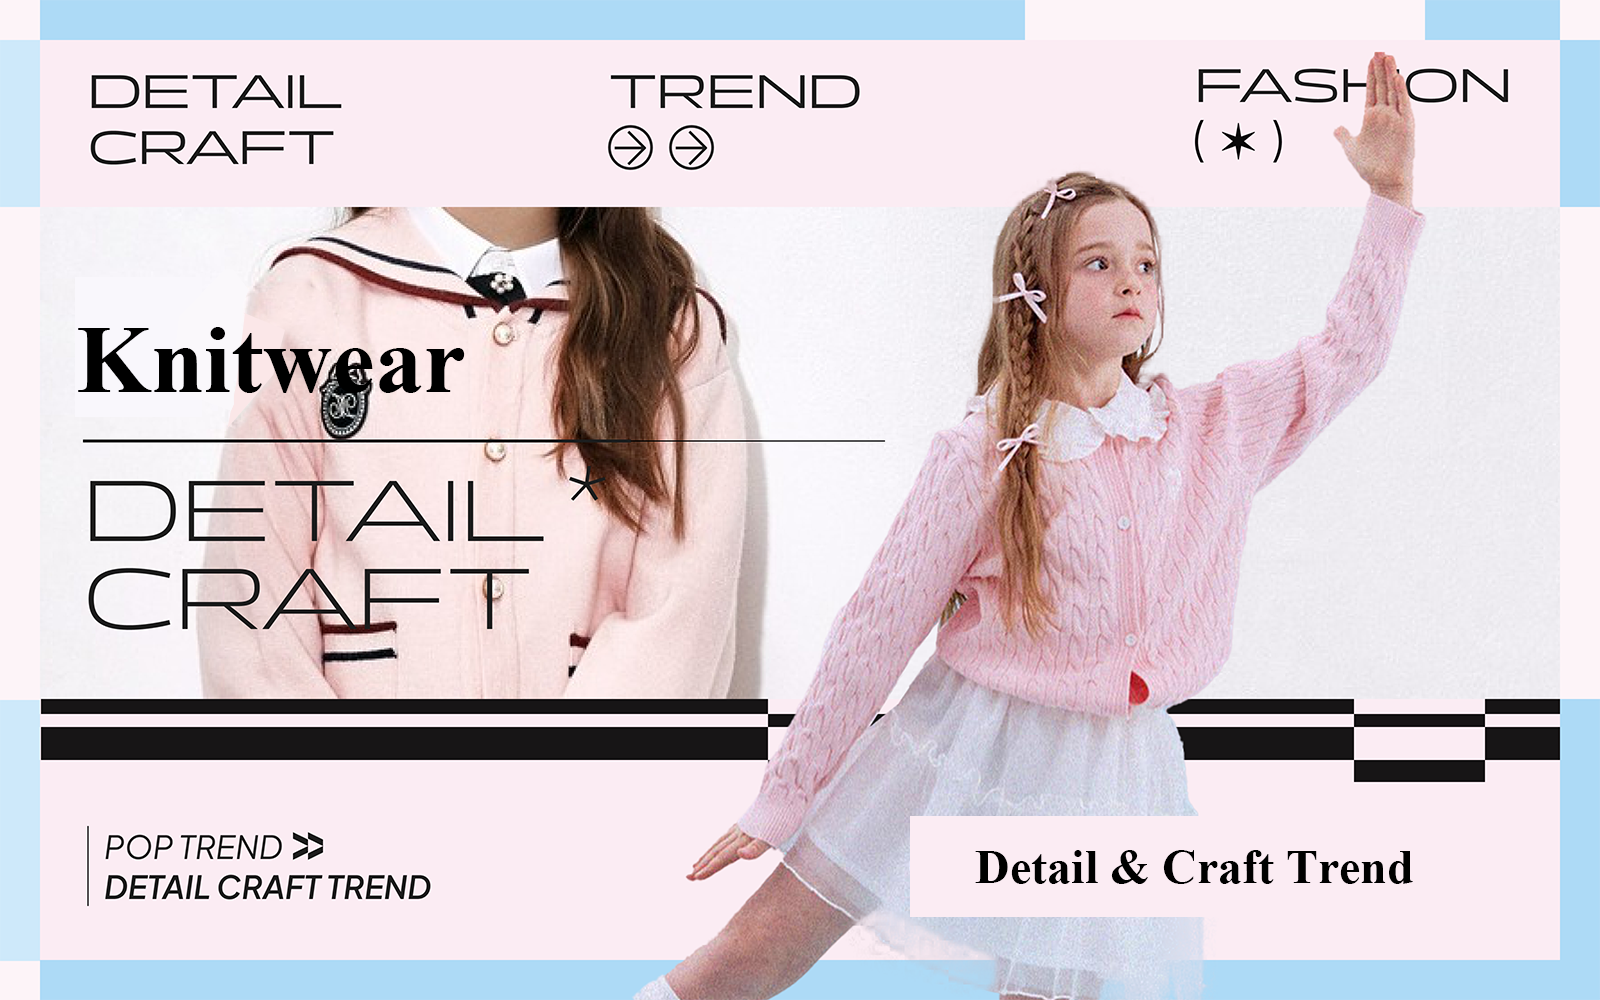 Knitwear - The Detail & Craft Trend for Girlswear